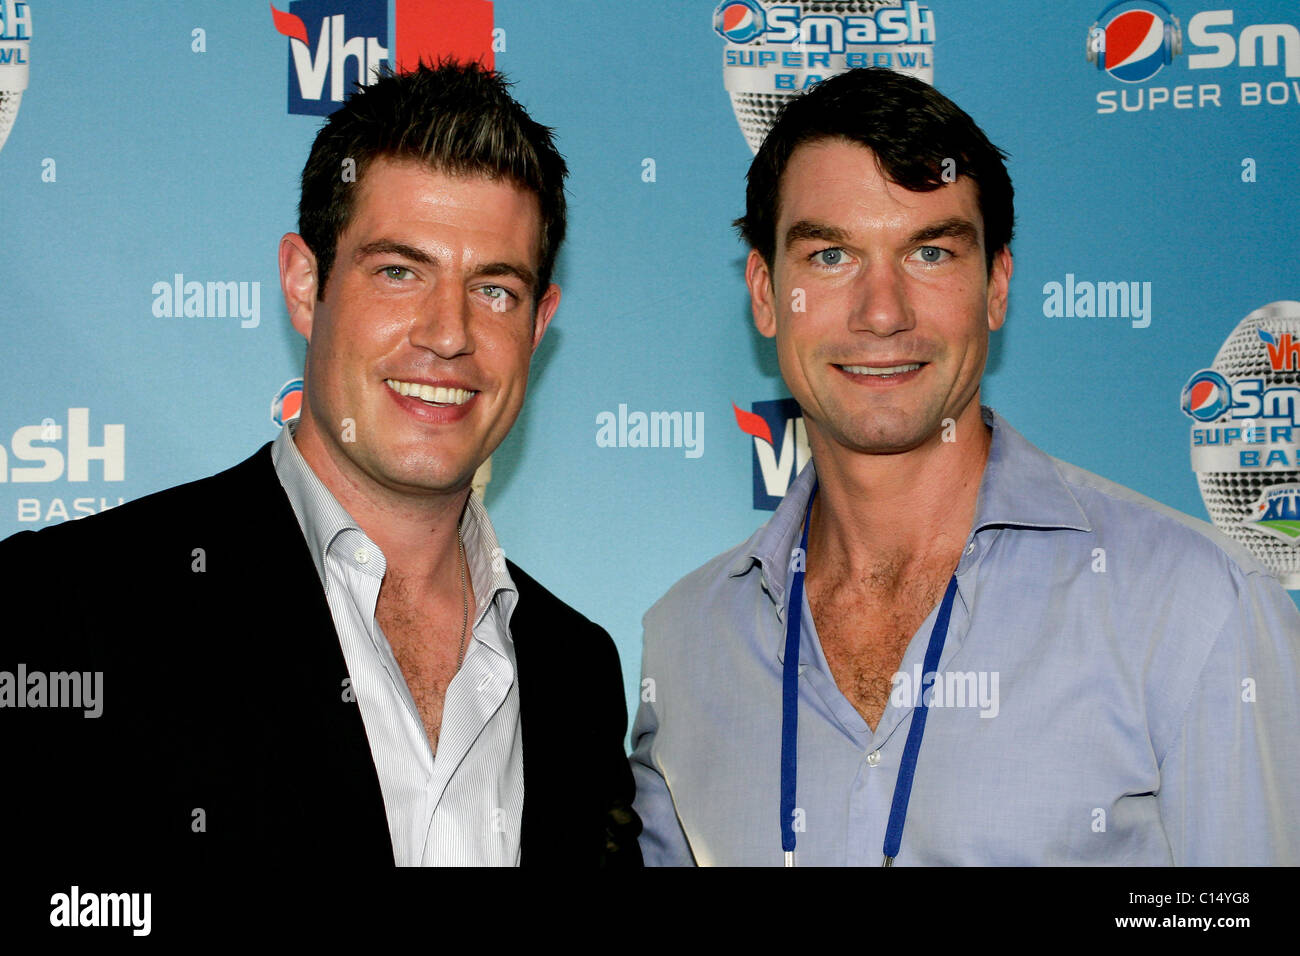 Jesse Palmer interviews Jerry O'Connell Jerry is hosting the Super Bowl XLIII Pepsi Smash at the Ford Amphitheatre Tampa, Stock Photo